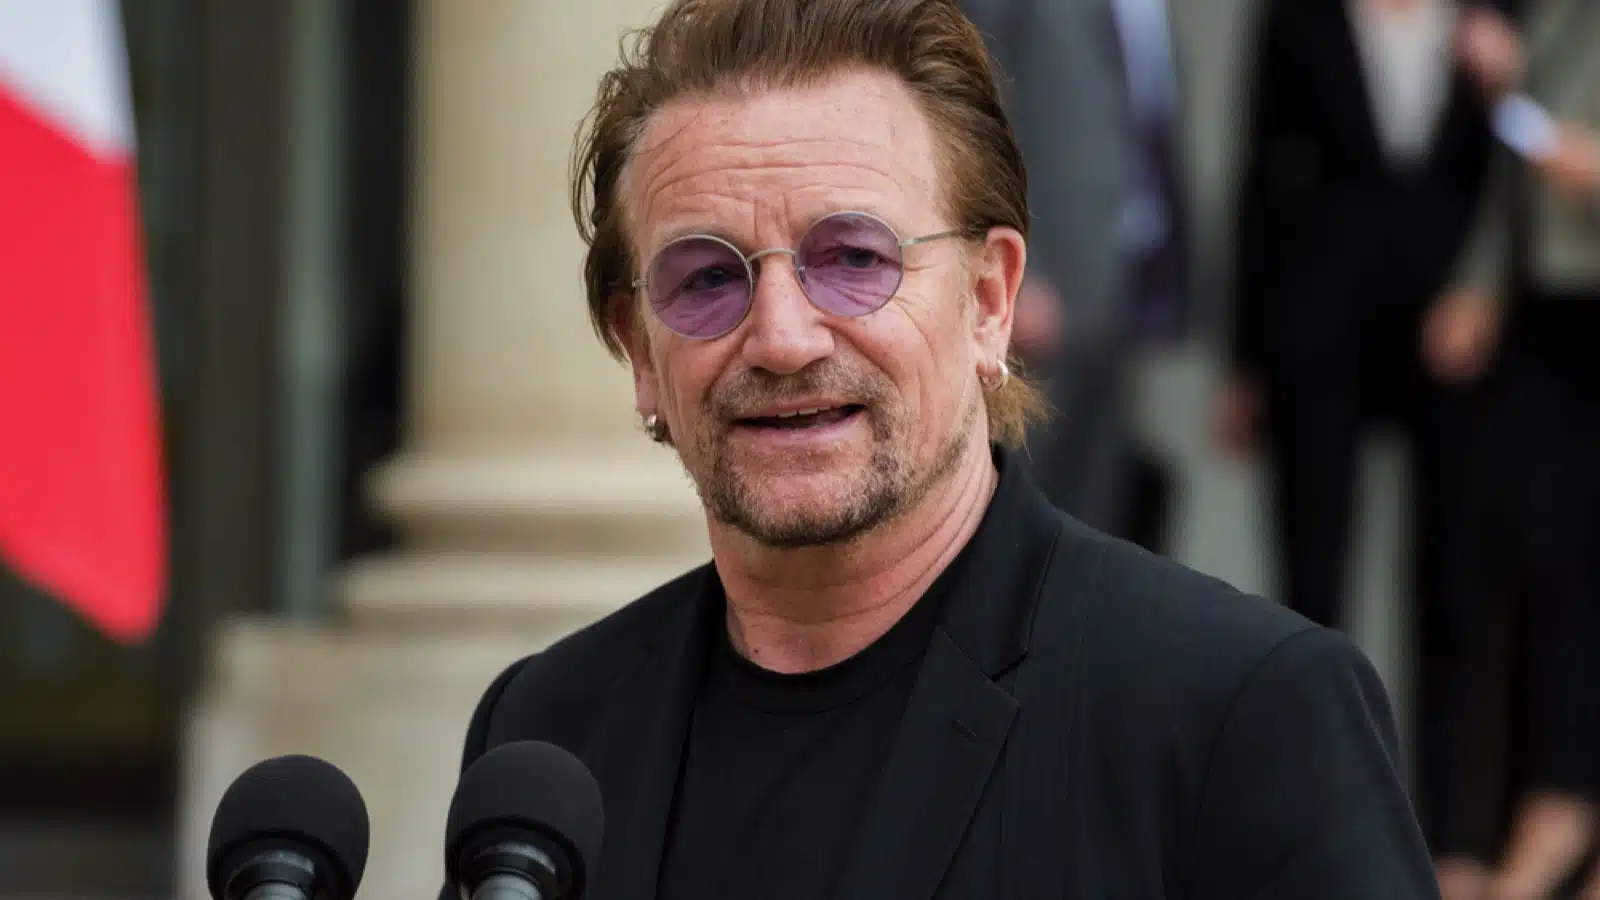 Paris, FRANCE - July 24, 2017 : Bono, the singer and leader of the band group U2 and Co-founder of the organization ONE at Elysee Palace to meet the french President to speak about his organization.